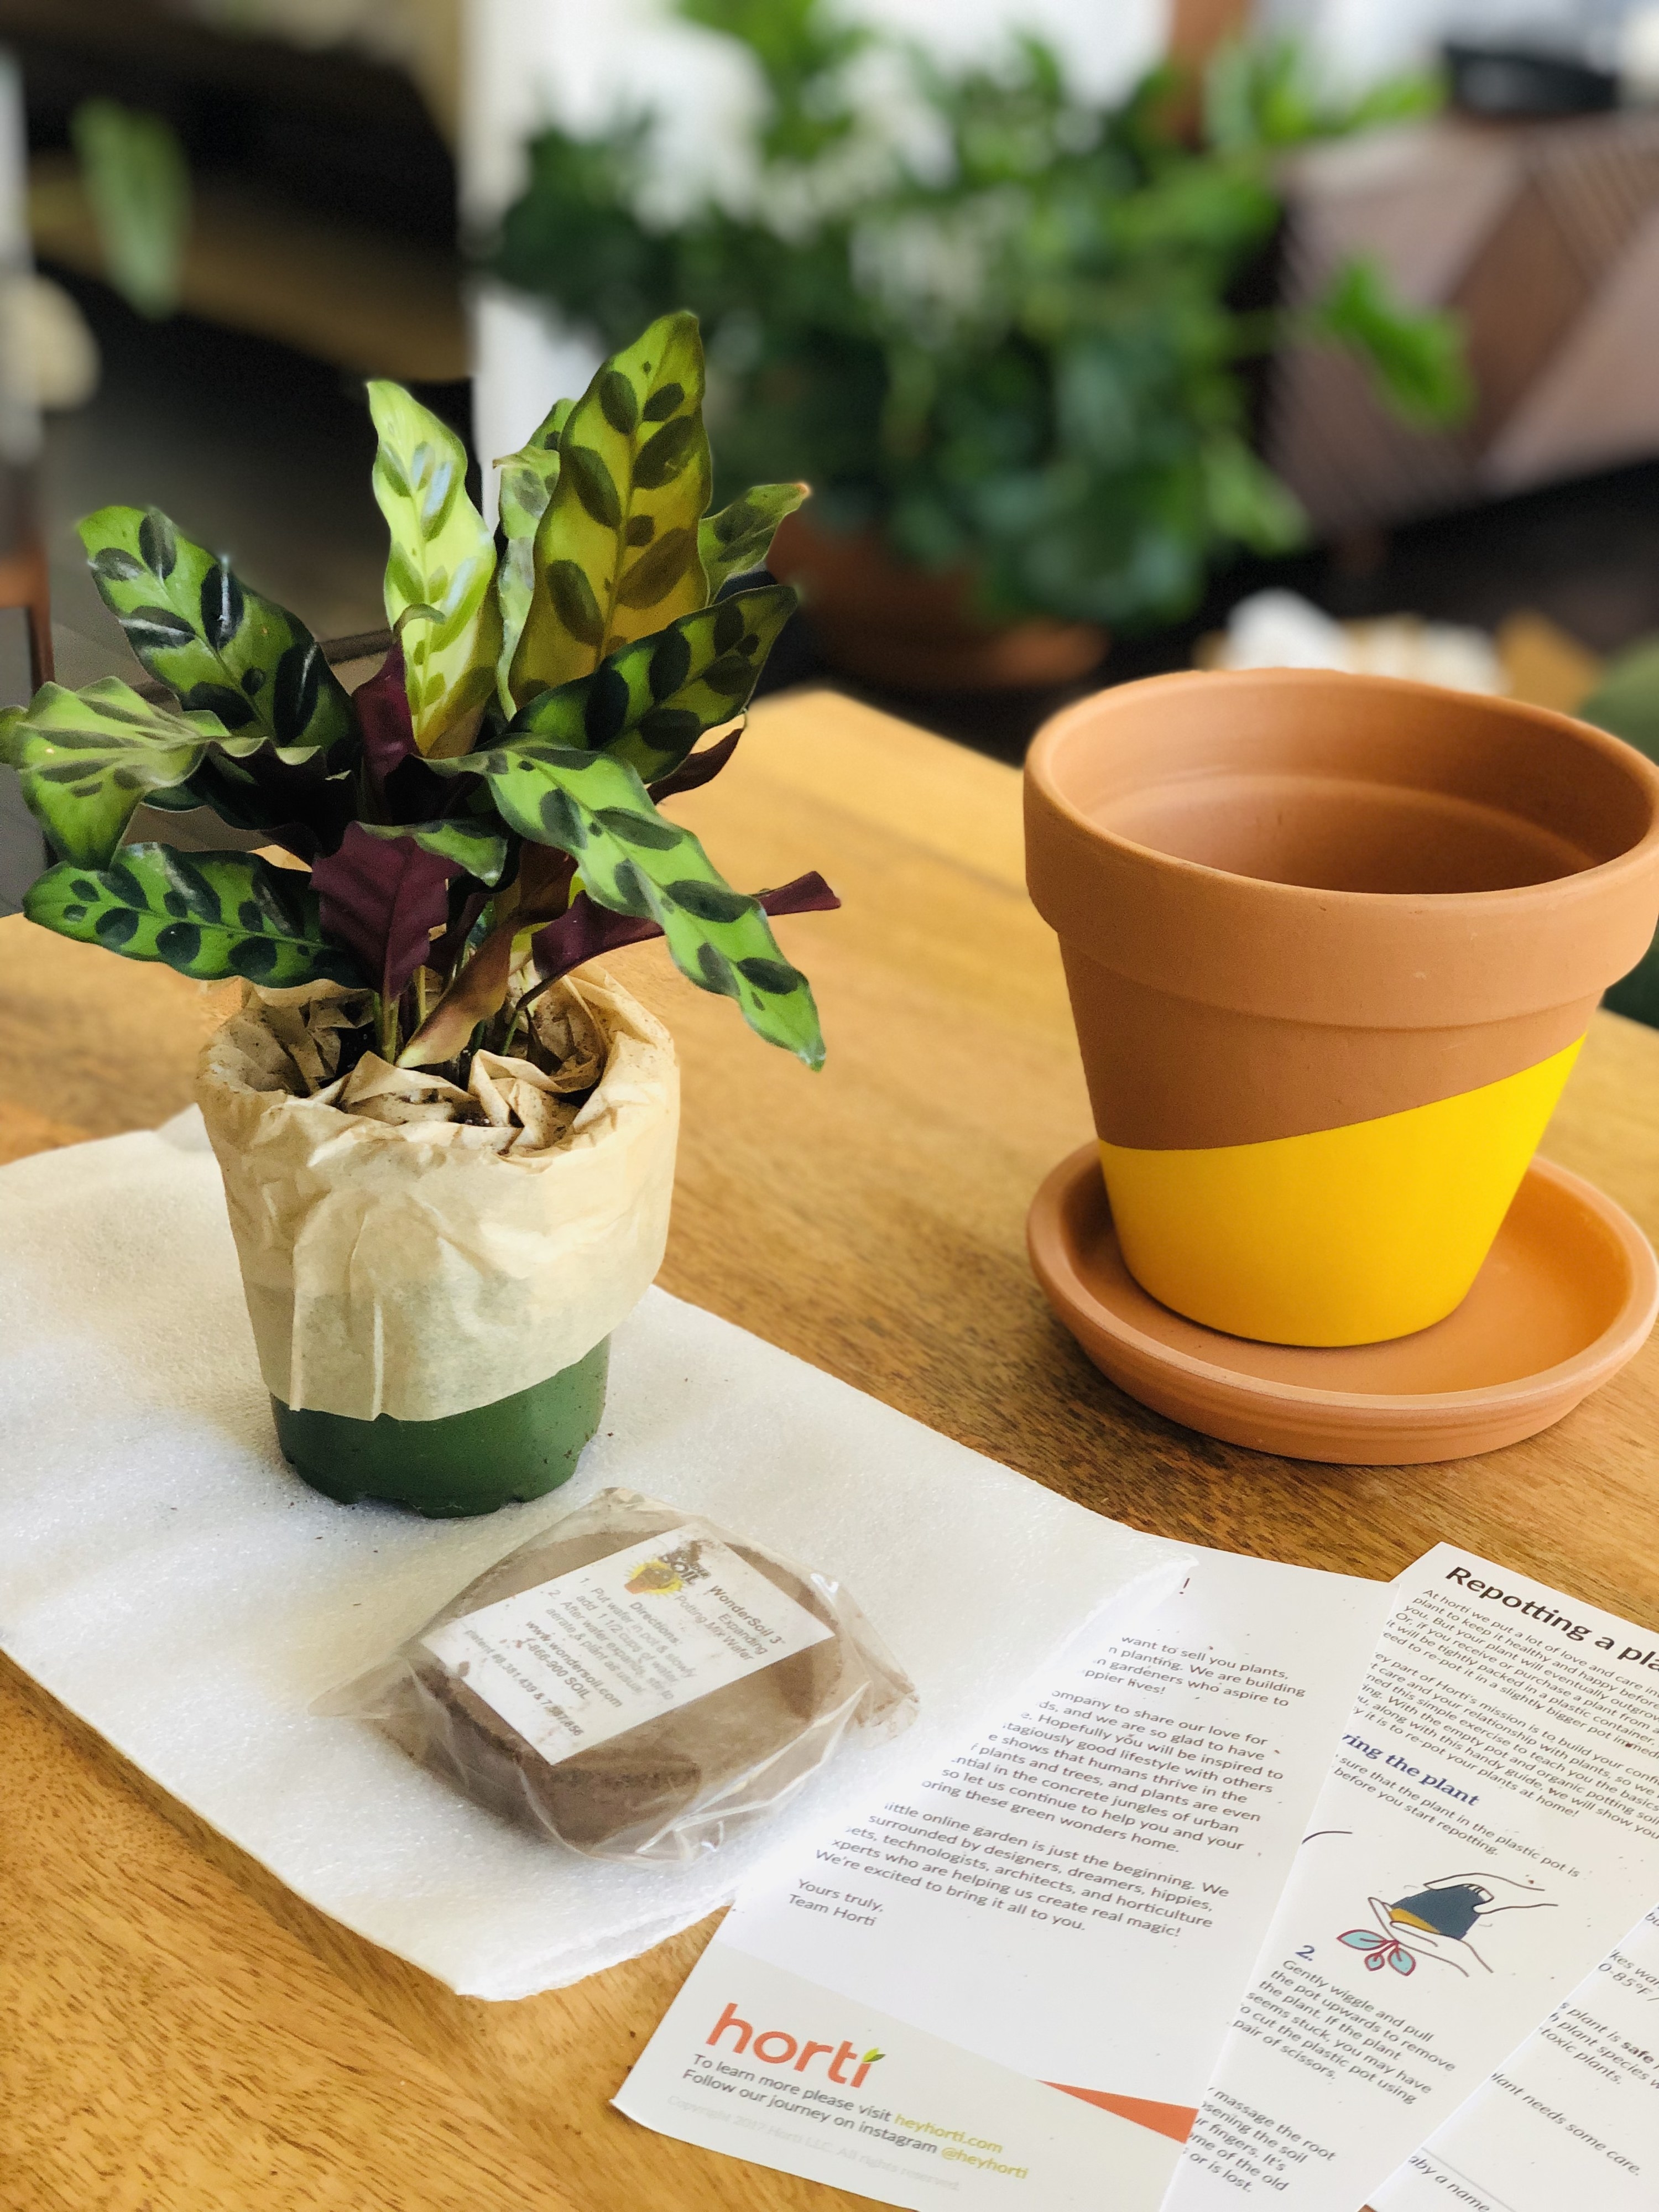 The plant, pot, and care guide